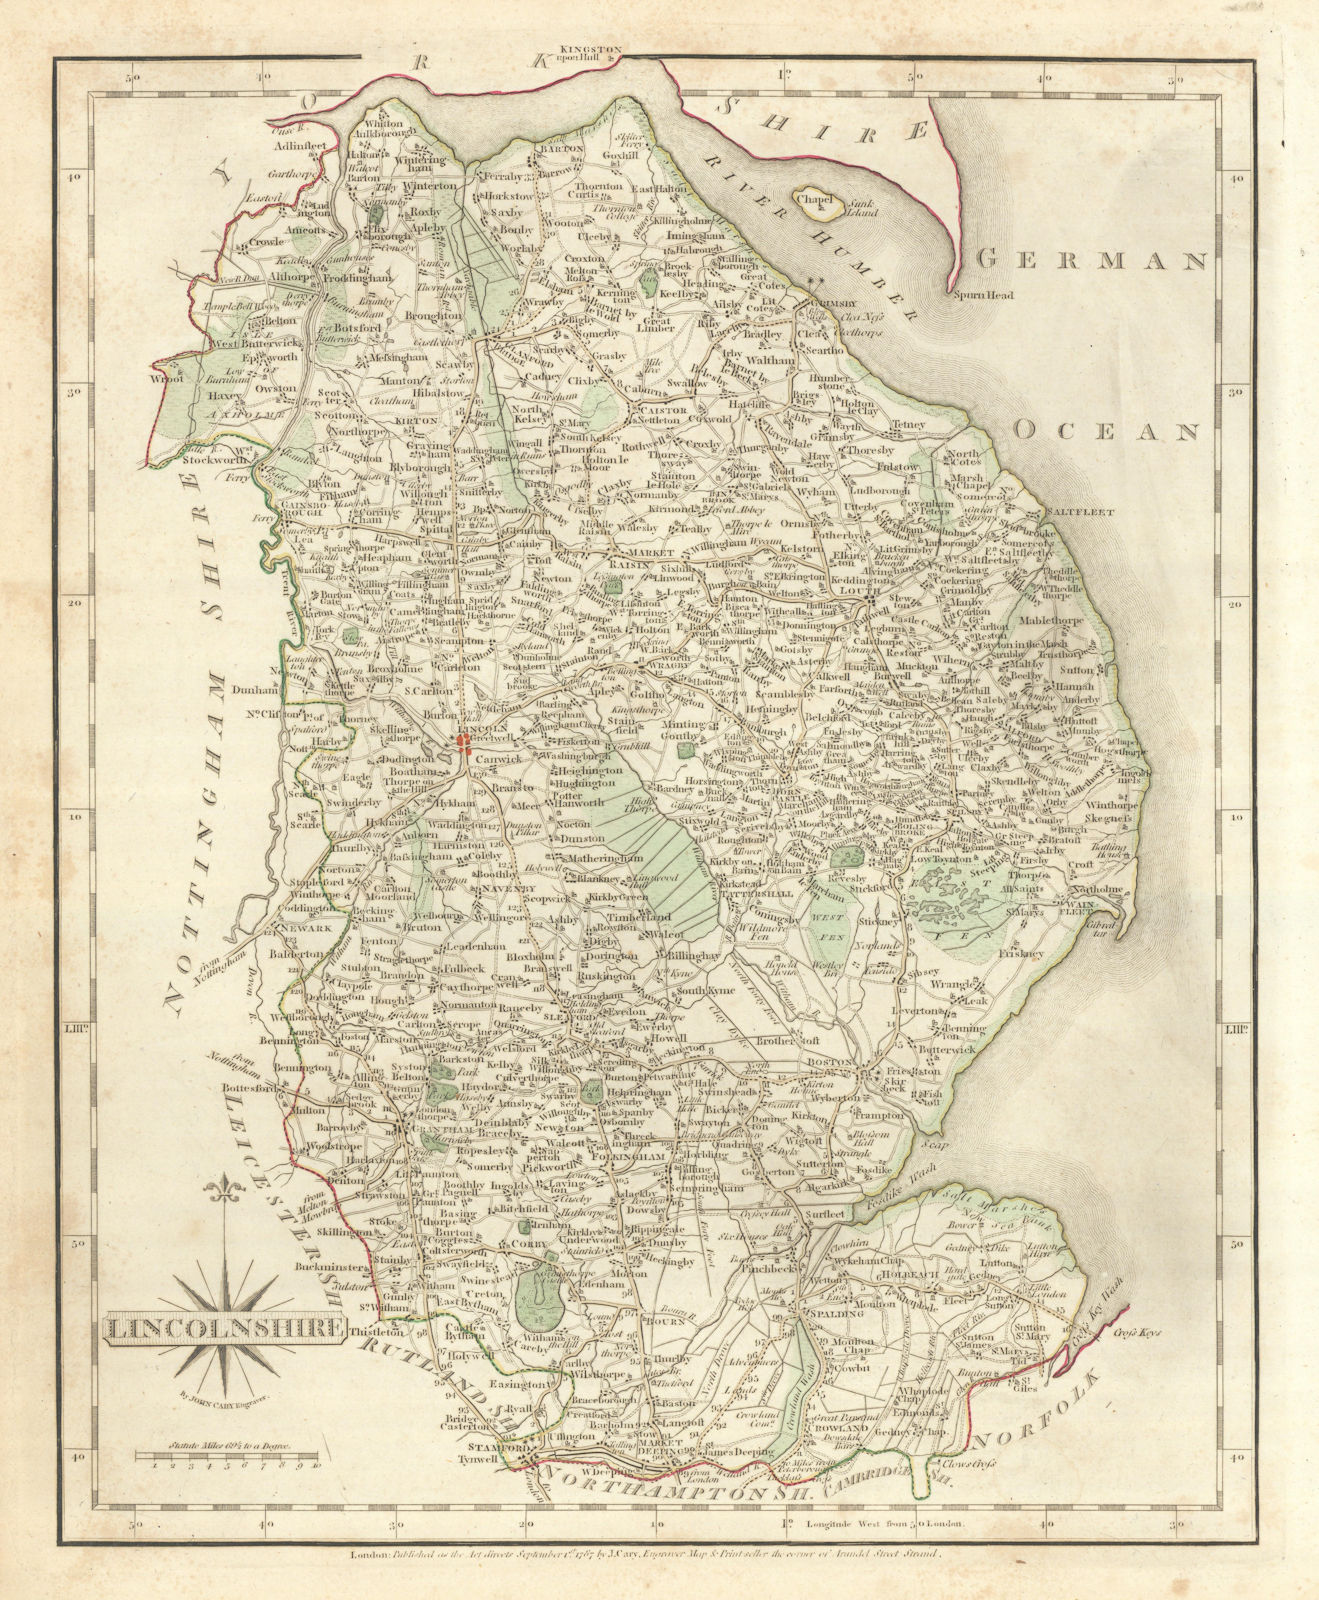 Antique county map of LINCOLNSHIRE by JOHN CARY. Original outline colour 1793